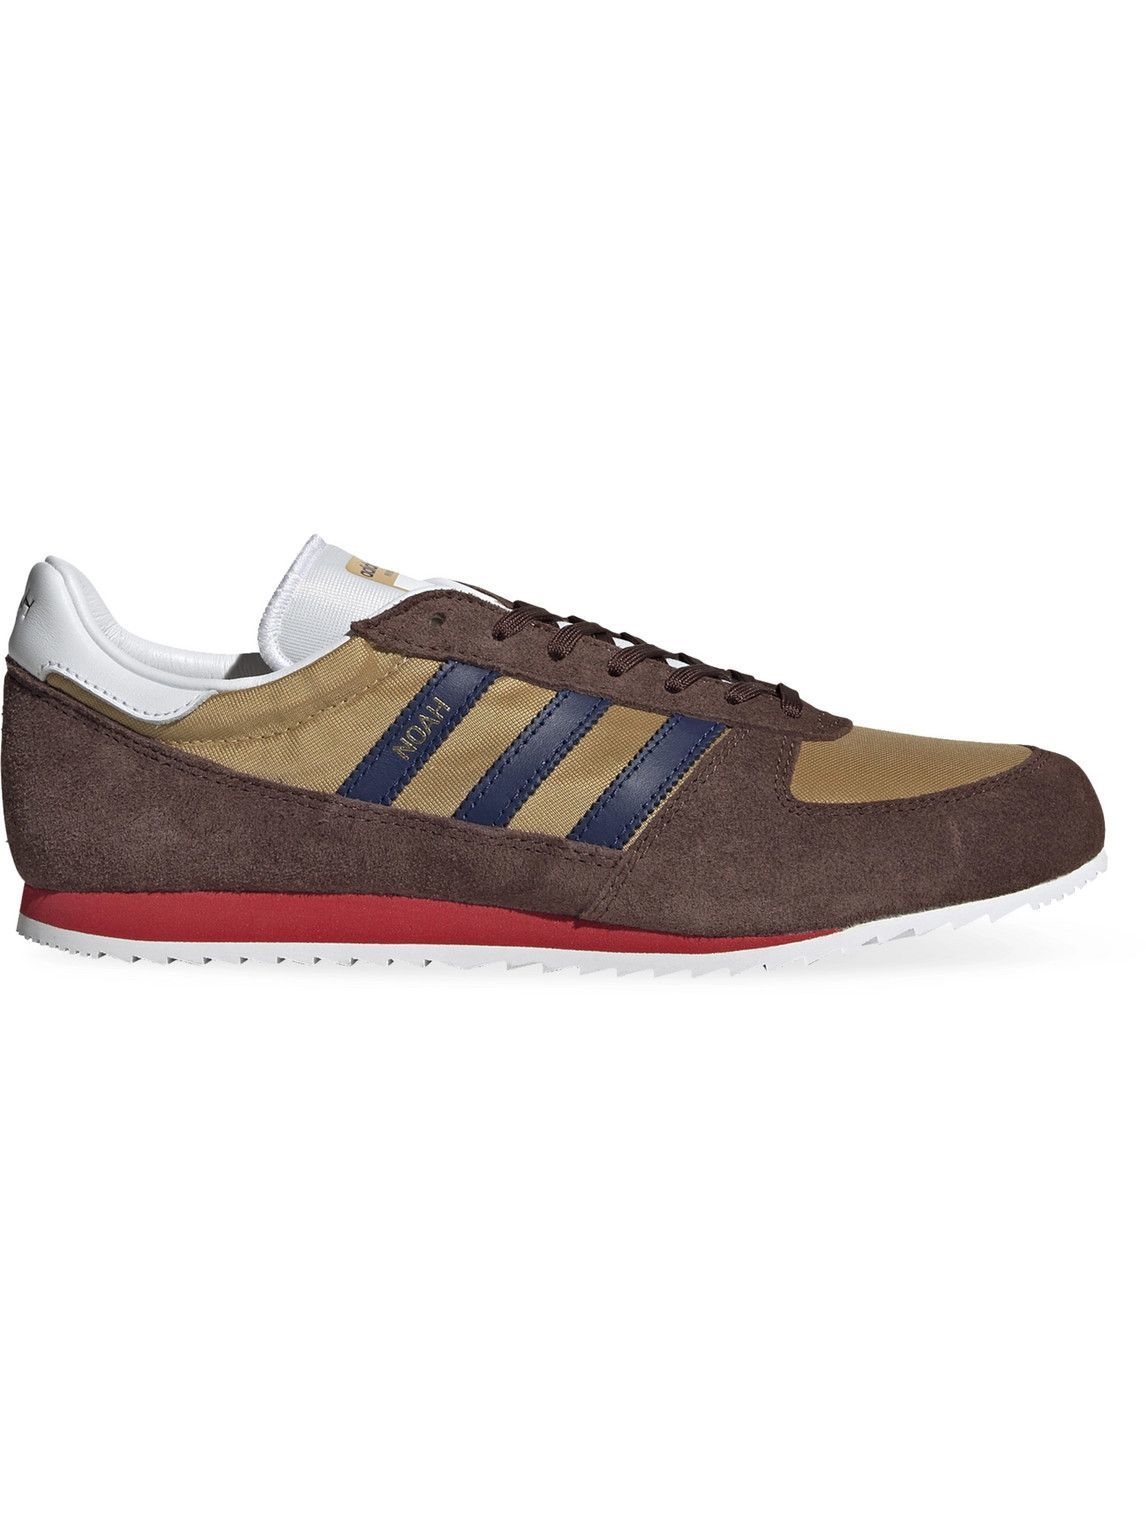 adidas Consortium - Noah Vintage Runner Leather-Trimmed and Suede Sneakers - Brown adidas Consortium